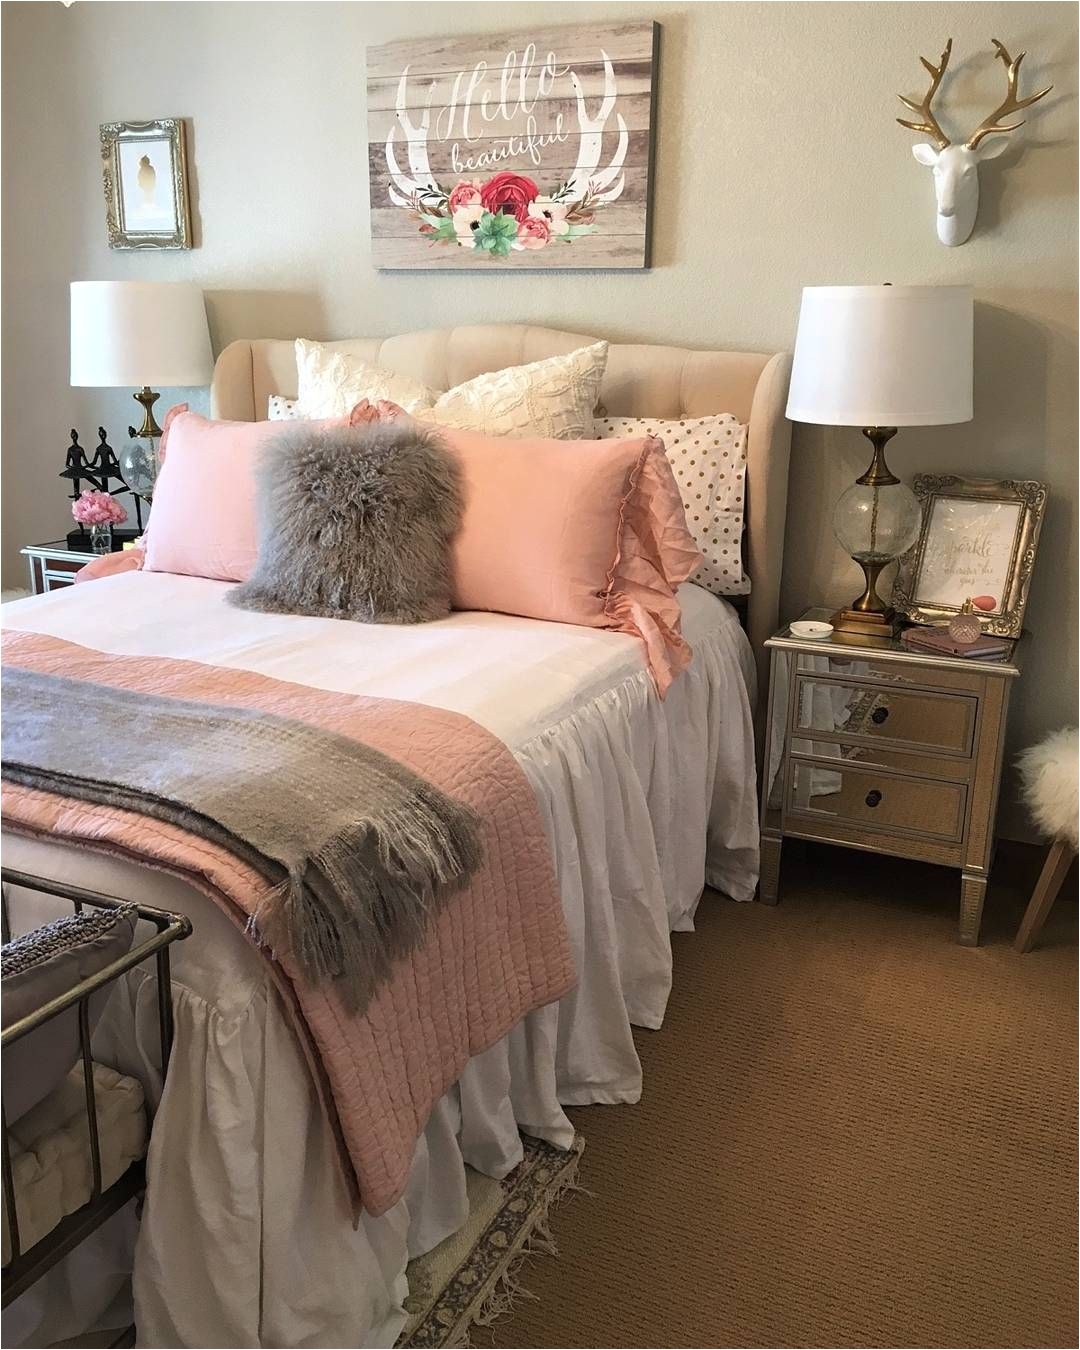 We re feeling pretty in pink with this stunning bedroom design Shoutout to our awesome customers for sharing their designs with us